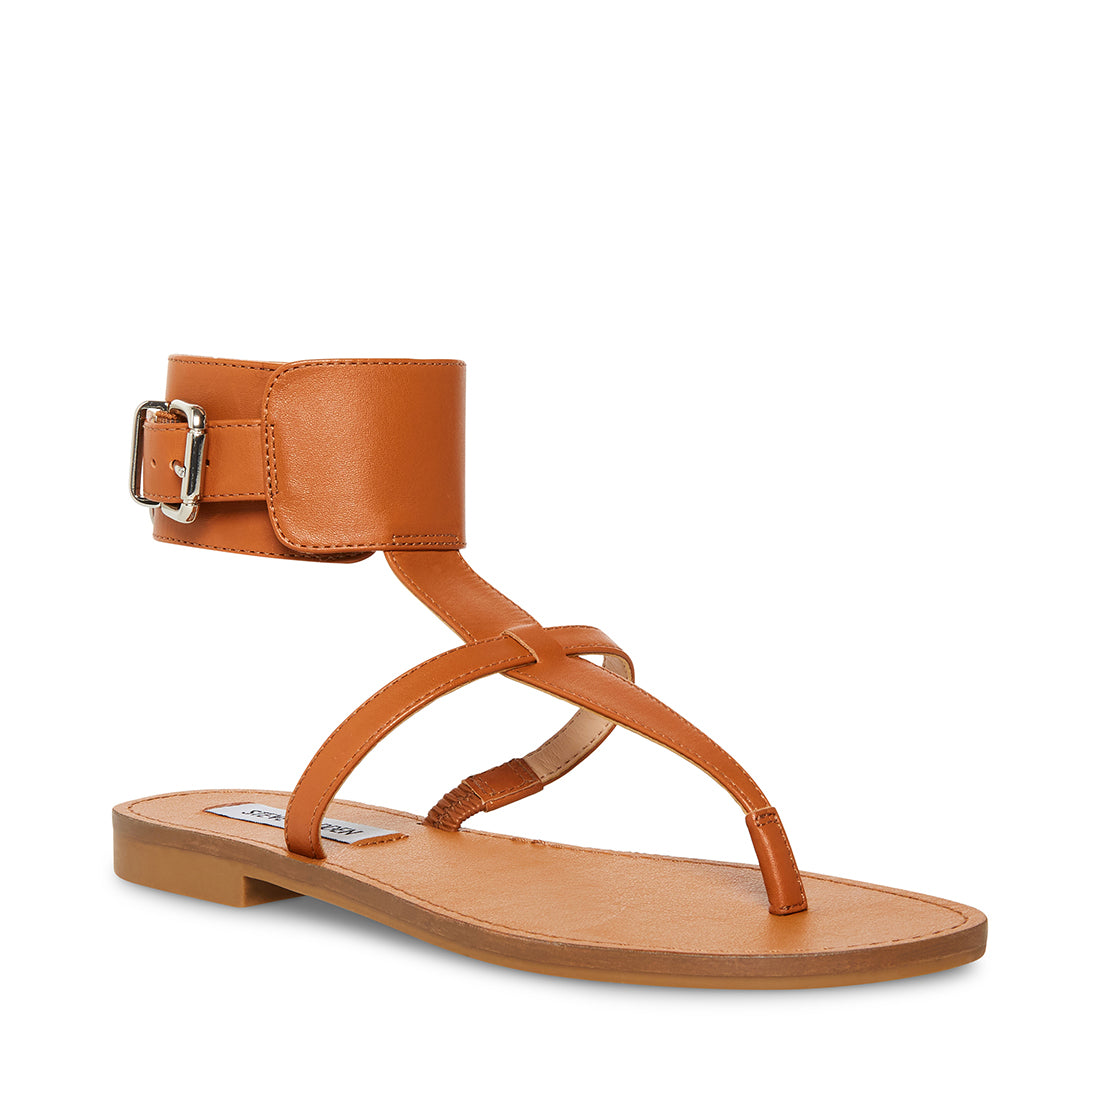 RICO Tan Leather Strappy Thong Sandal | Women's Sandals – Steve Madden